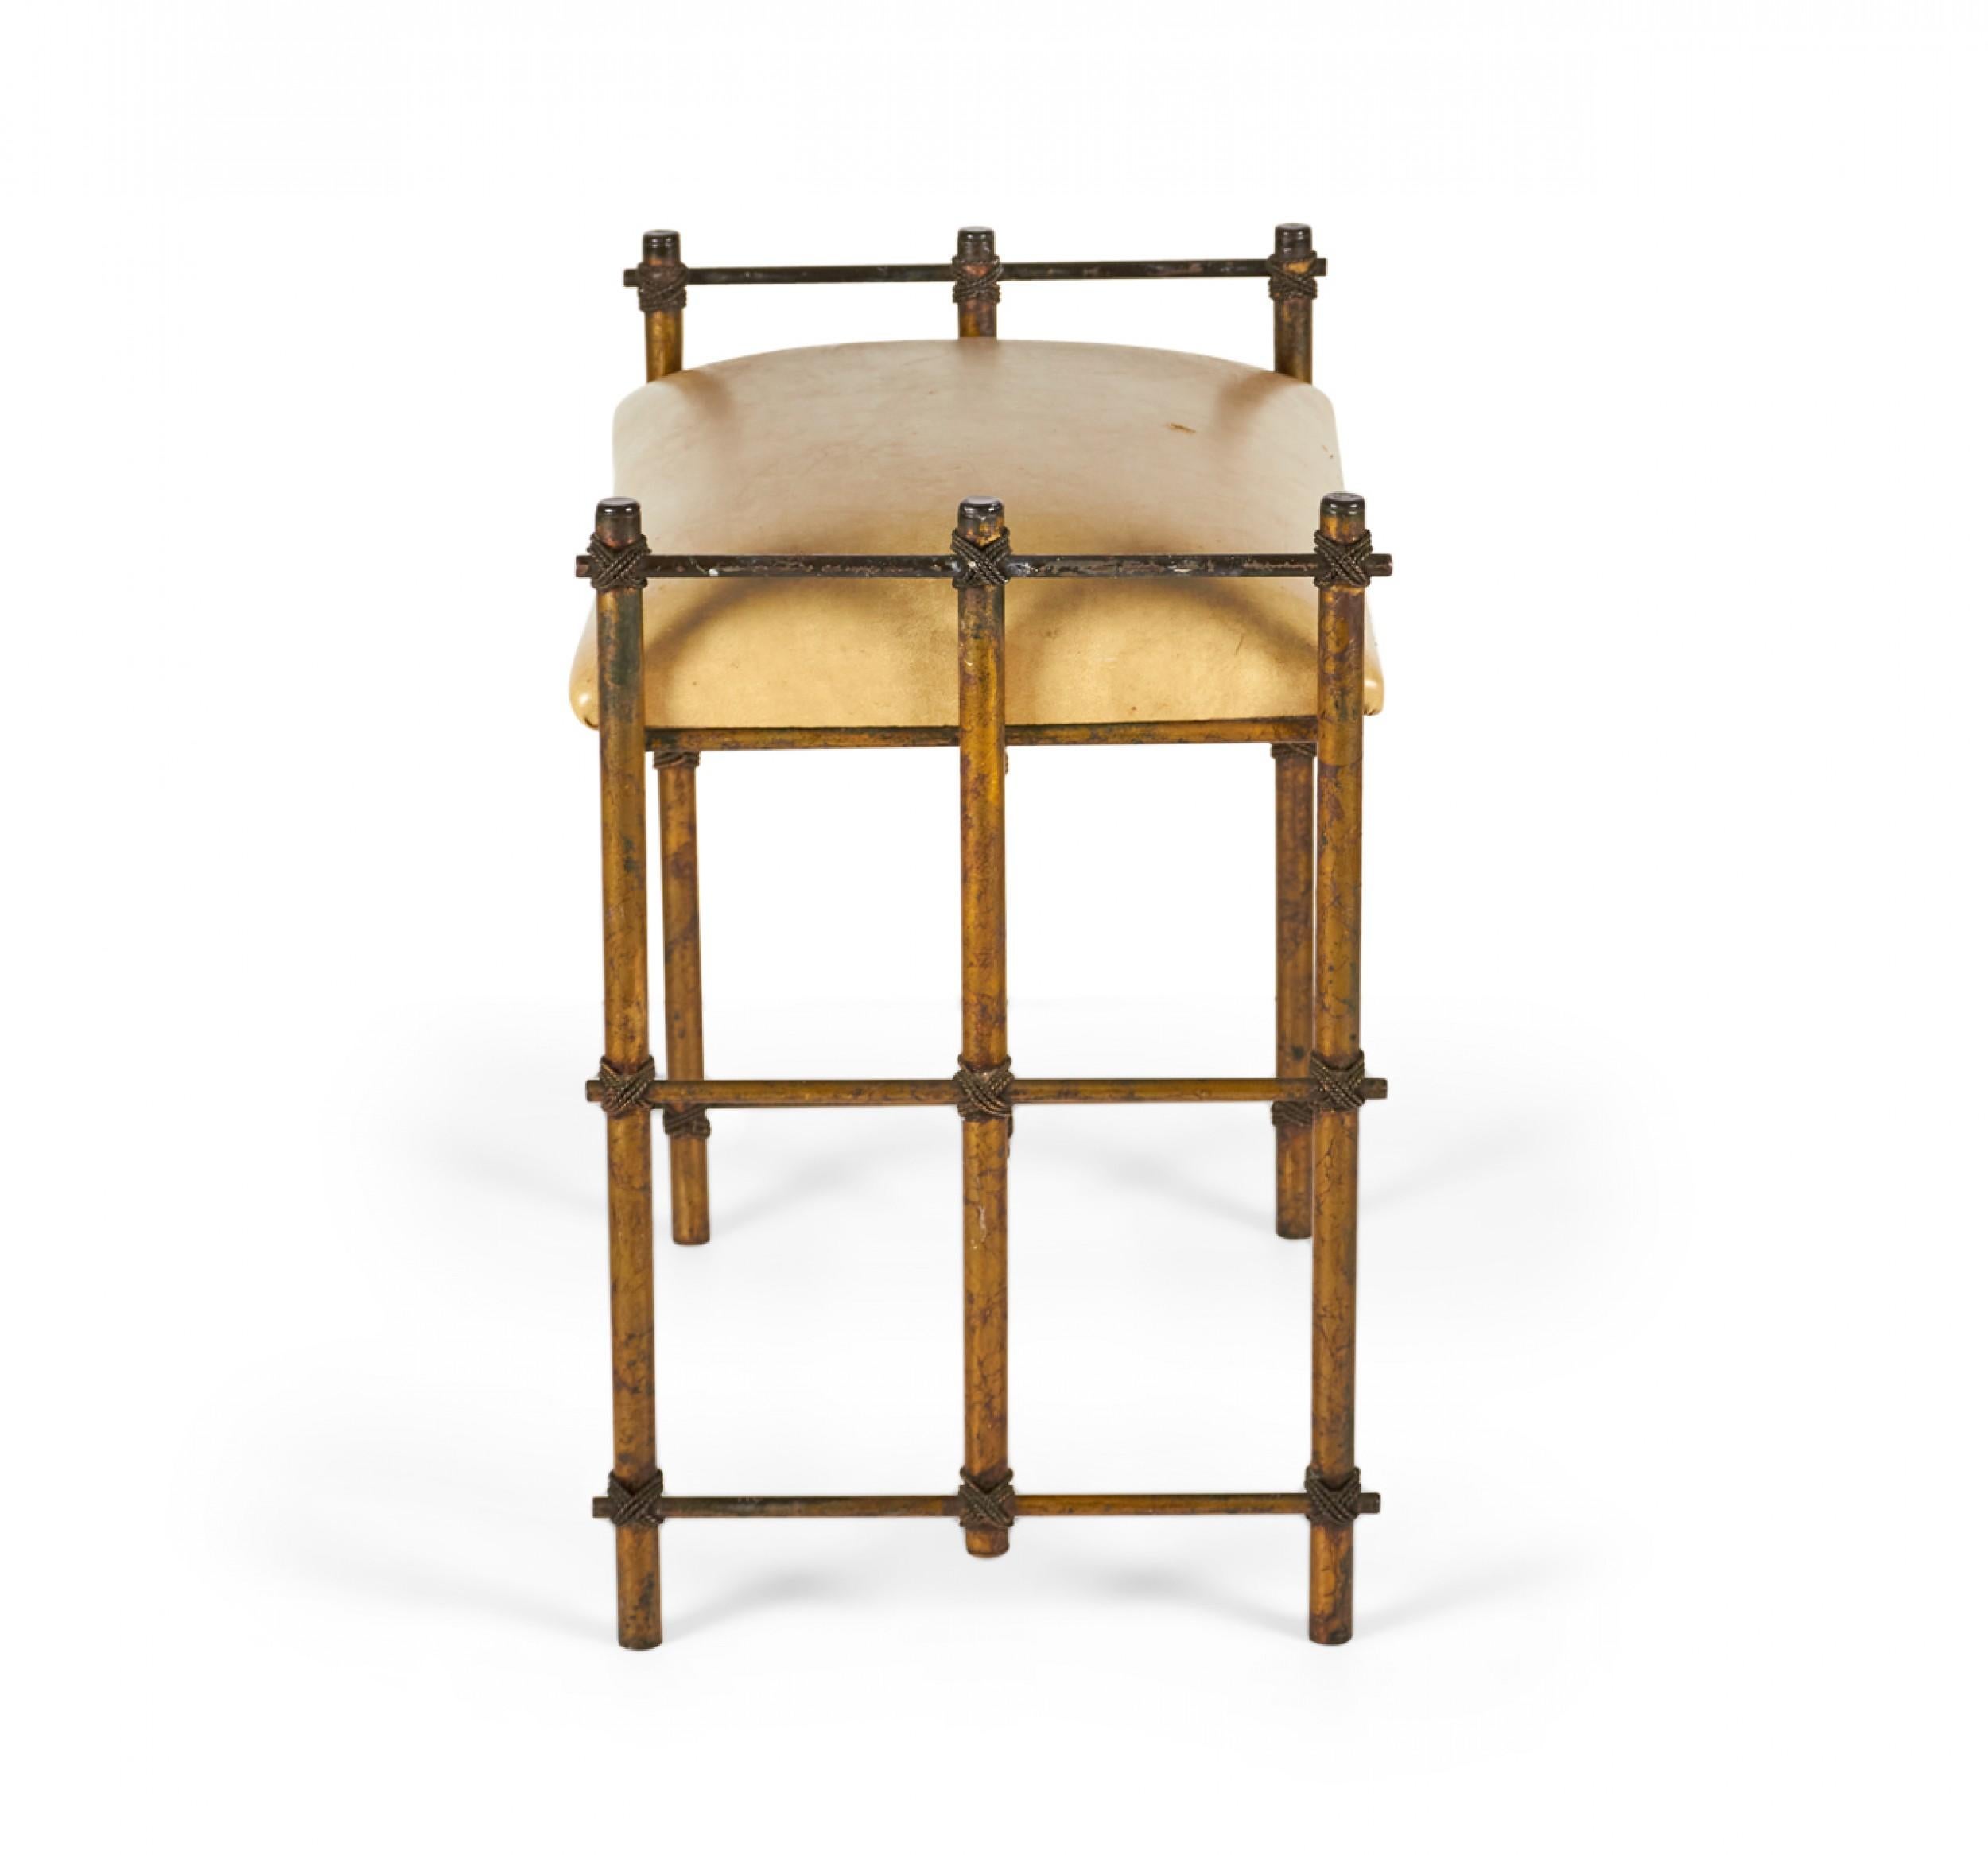 Vintage vanity bench with a patinated giltwood frame comprised of three dowel supports on either side connected with decoratively tied rope at the cross-sections and joined in the center by two stretcher dowels to support a beige leather upholstered